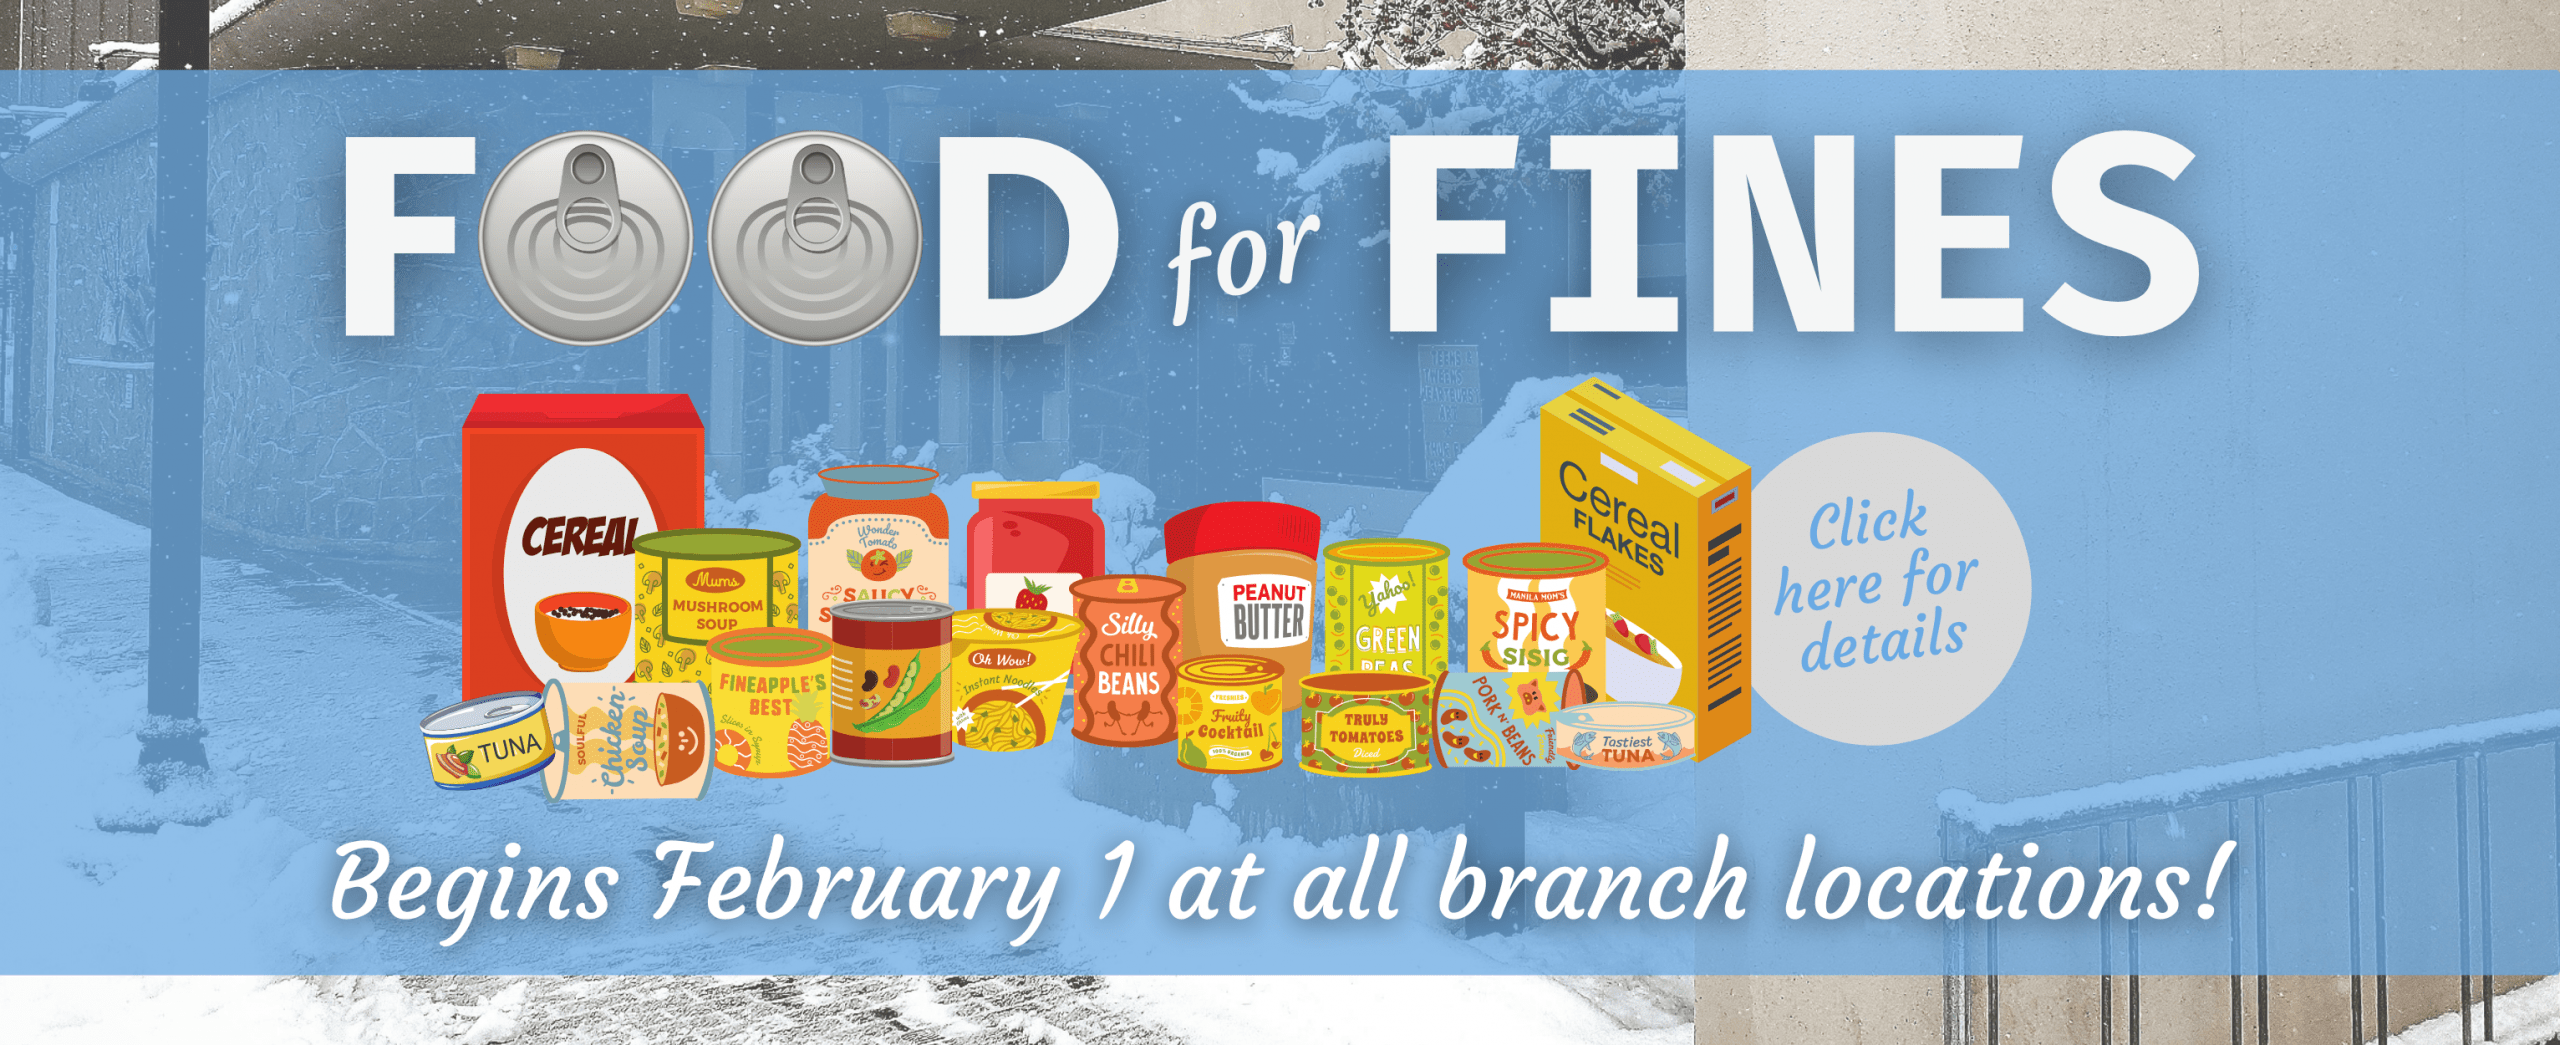 Food for Fines runs all month long at all of our branch locations. Donate foods to waive your fees, or just donate in general. Click here for details. 